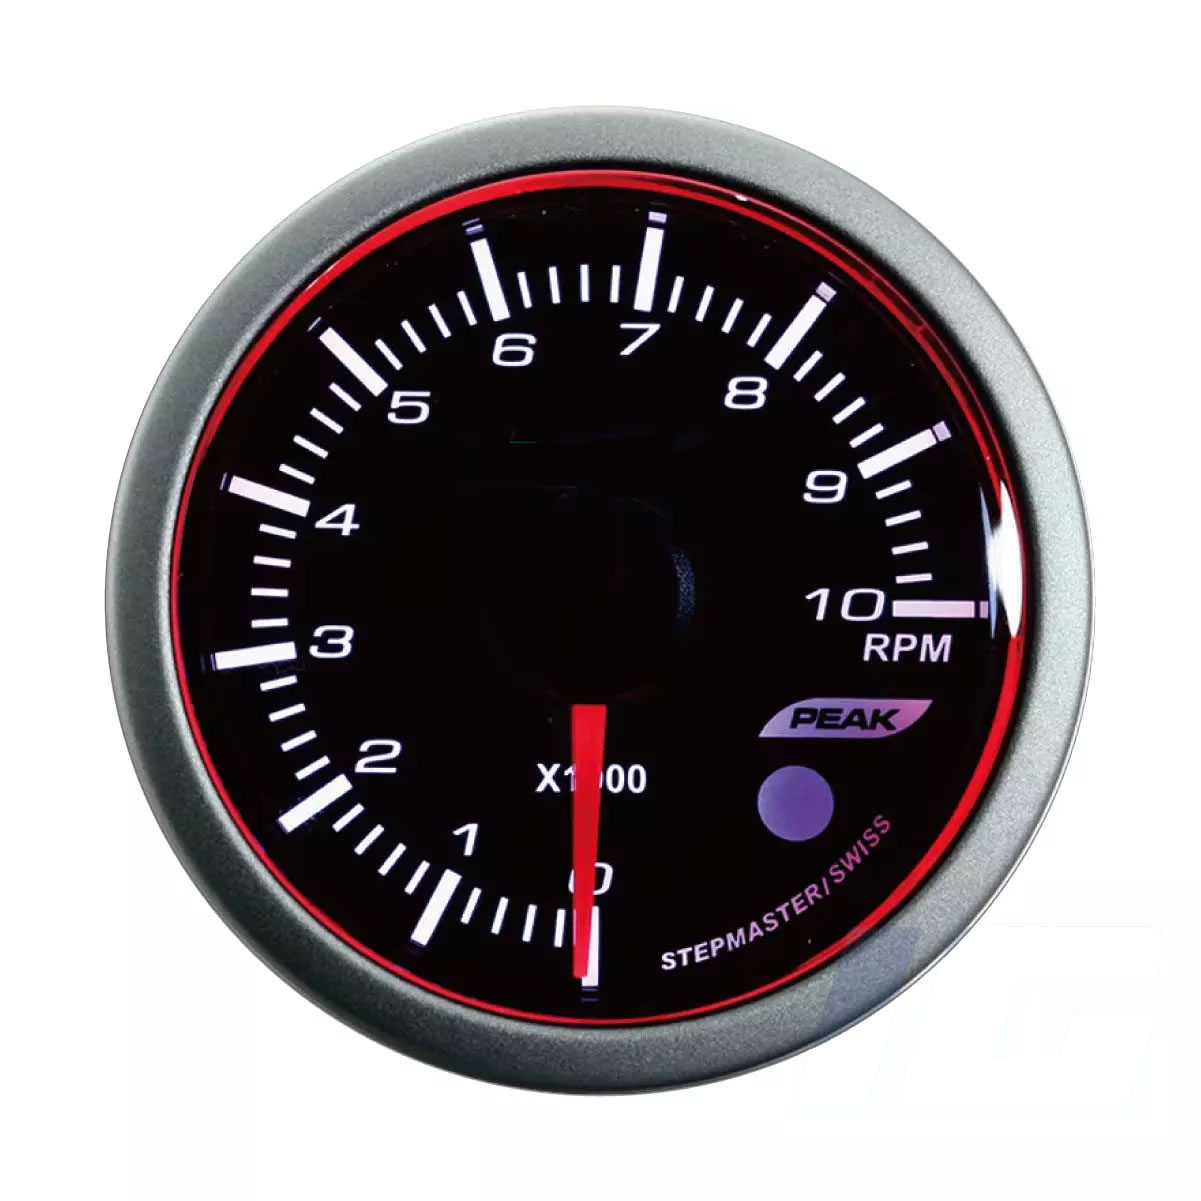 60mm White and Blue and Amber LED Performance Car Gauges - Tachometer With Warning and Peak For Your Sport Racing Car